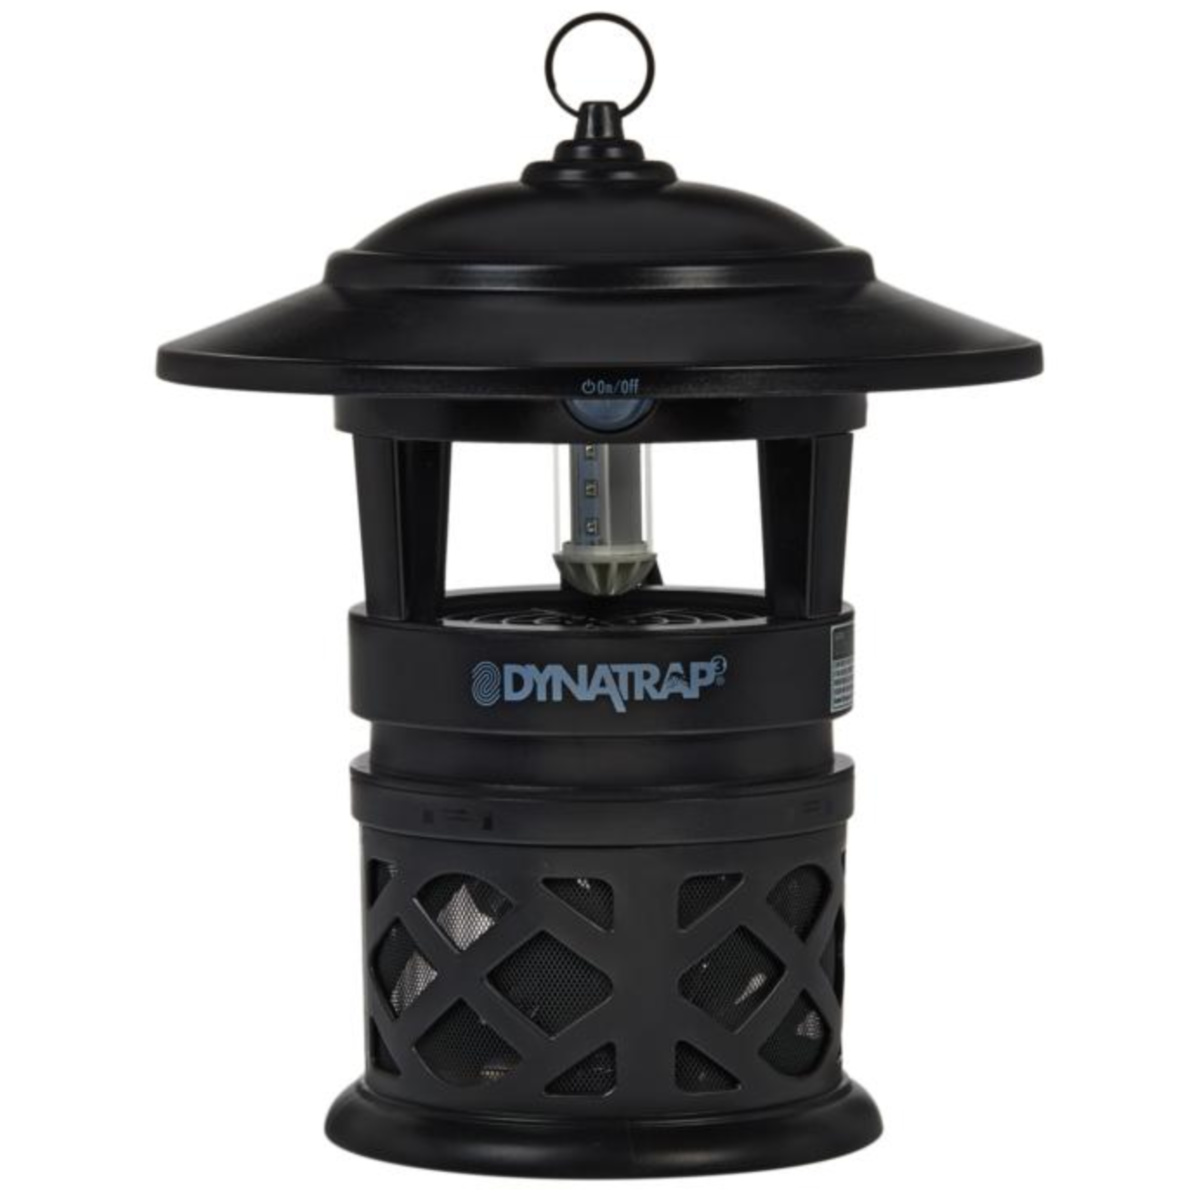 DynaTrap LED Mosquito Insect Trap DT1120-DECBK